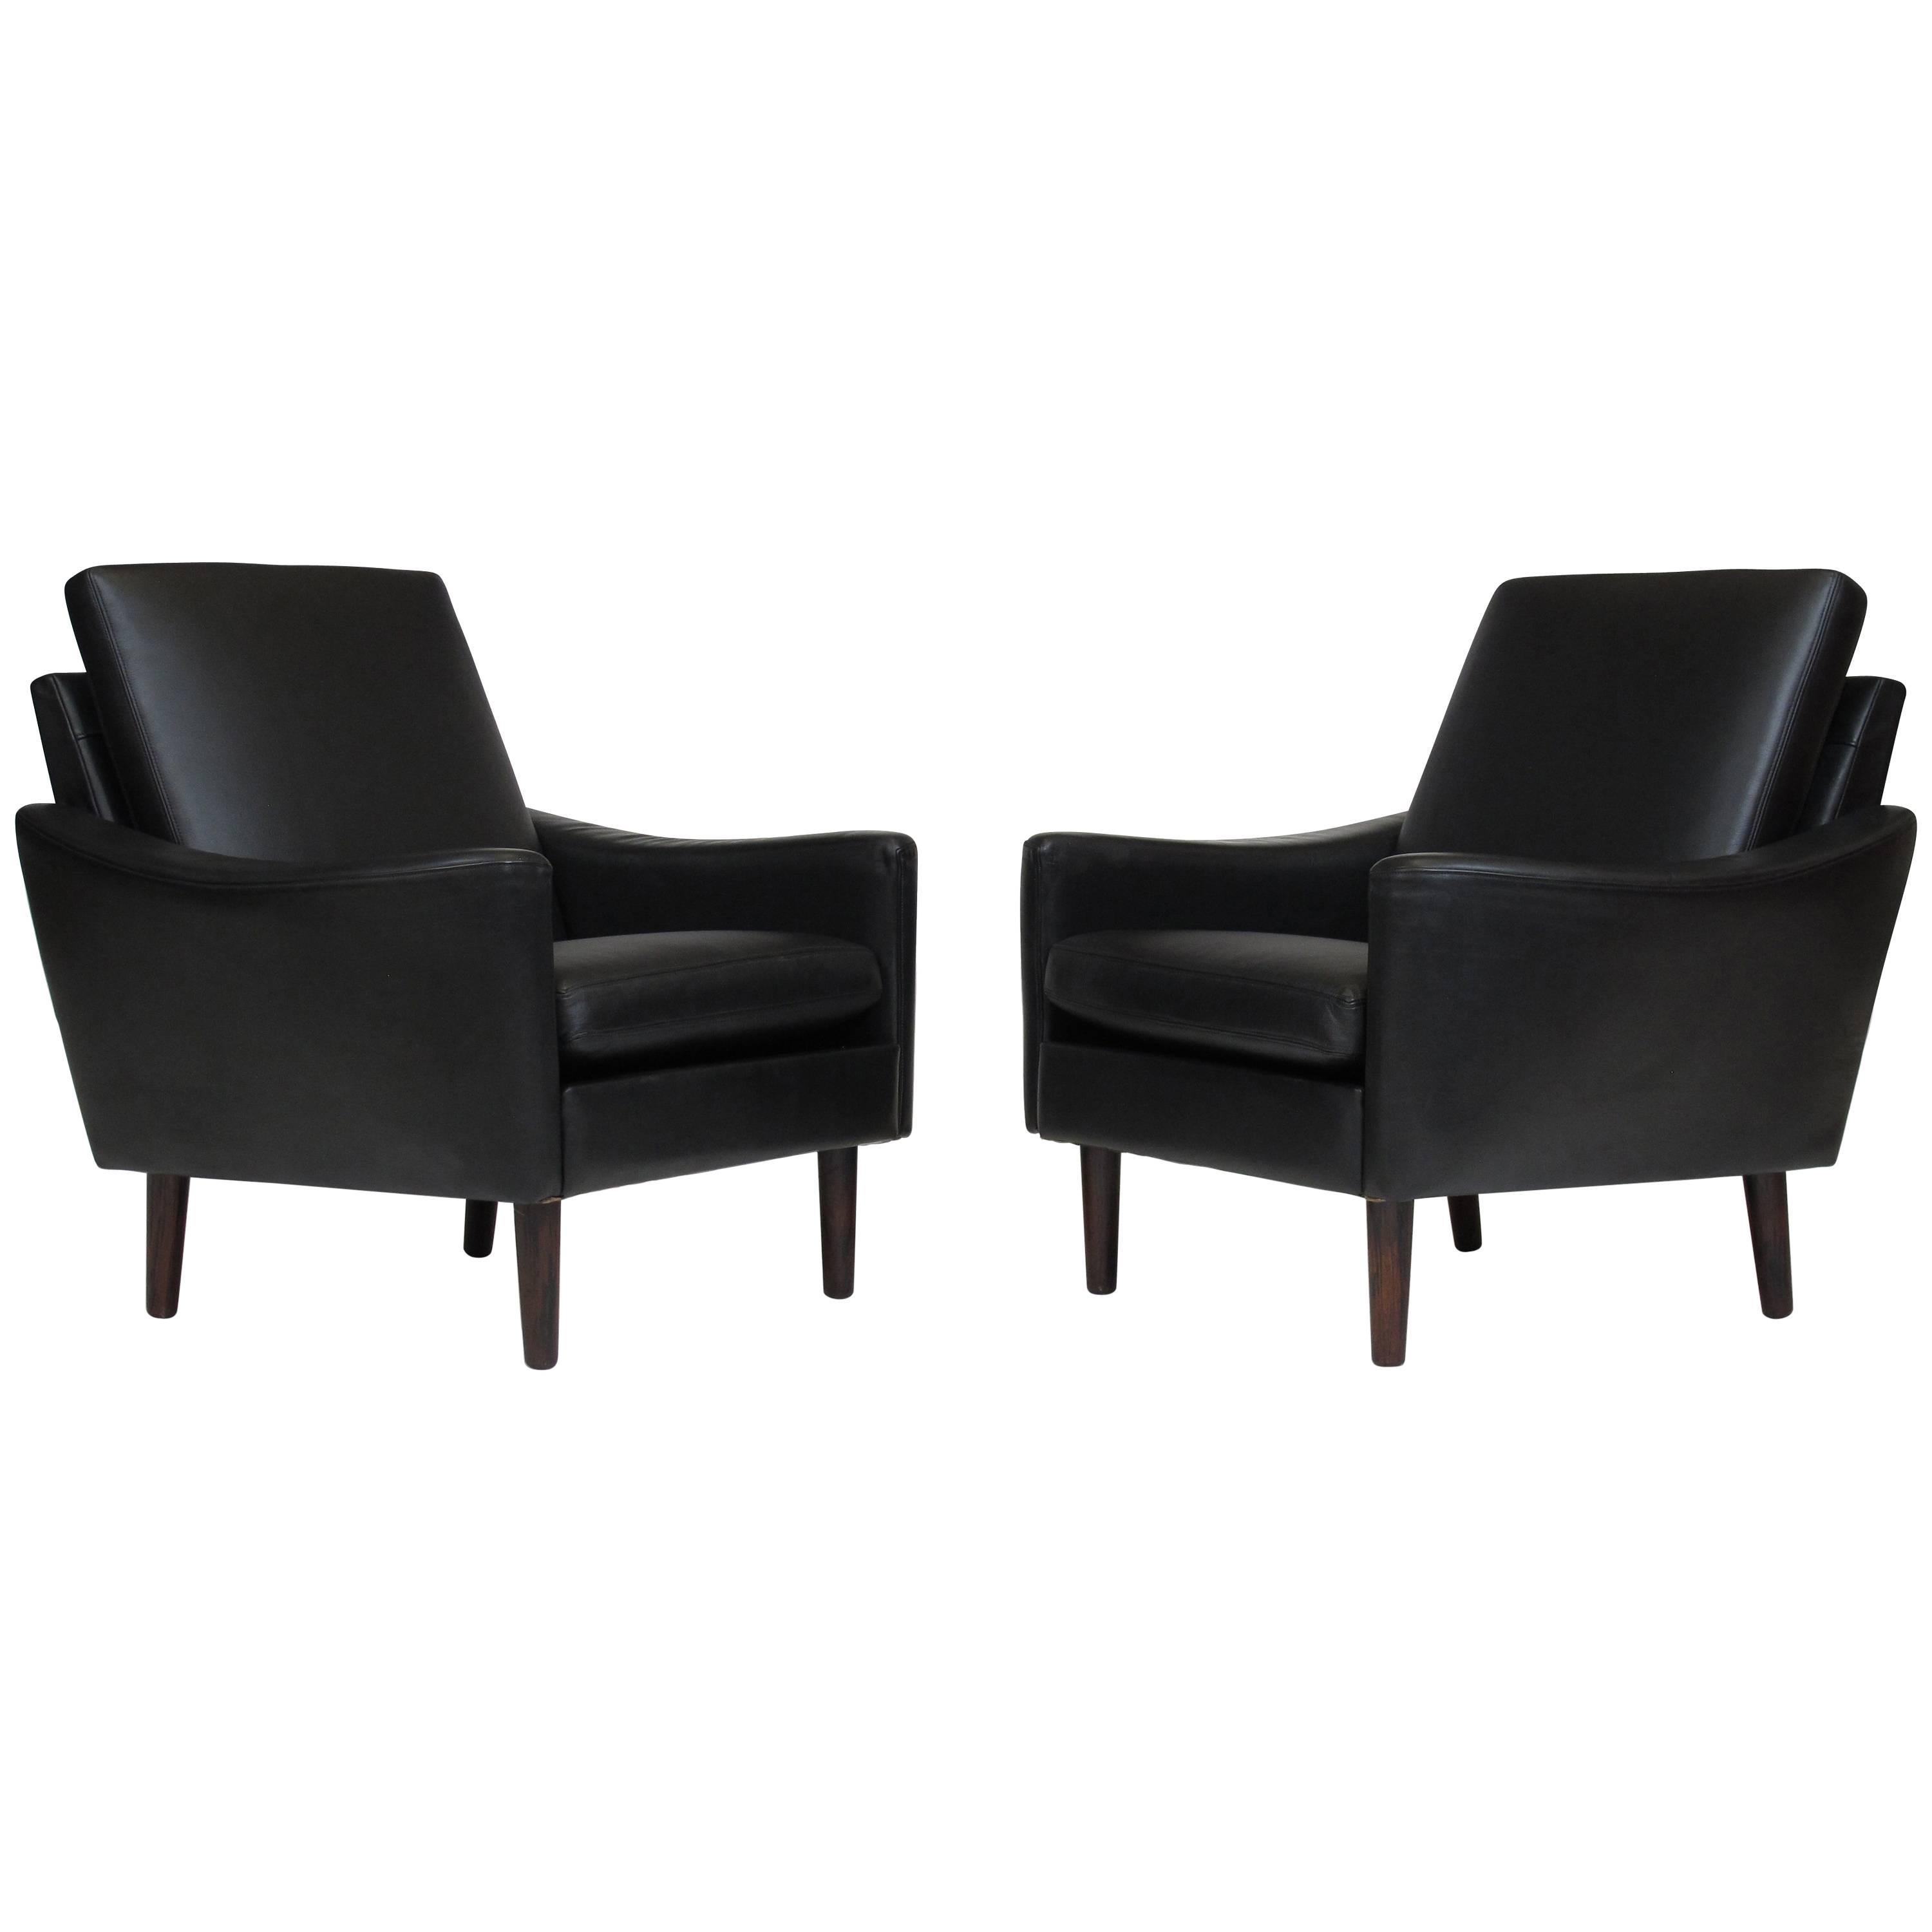 Pair of Danish Black Leather Lounge Chairs